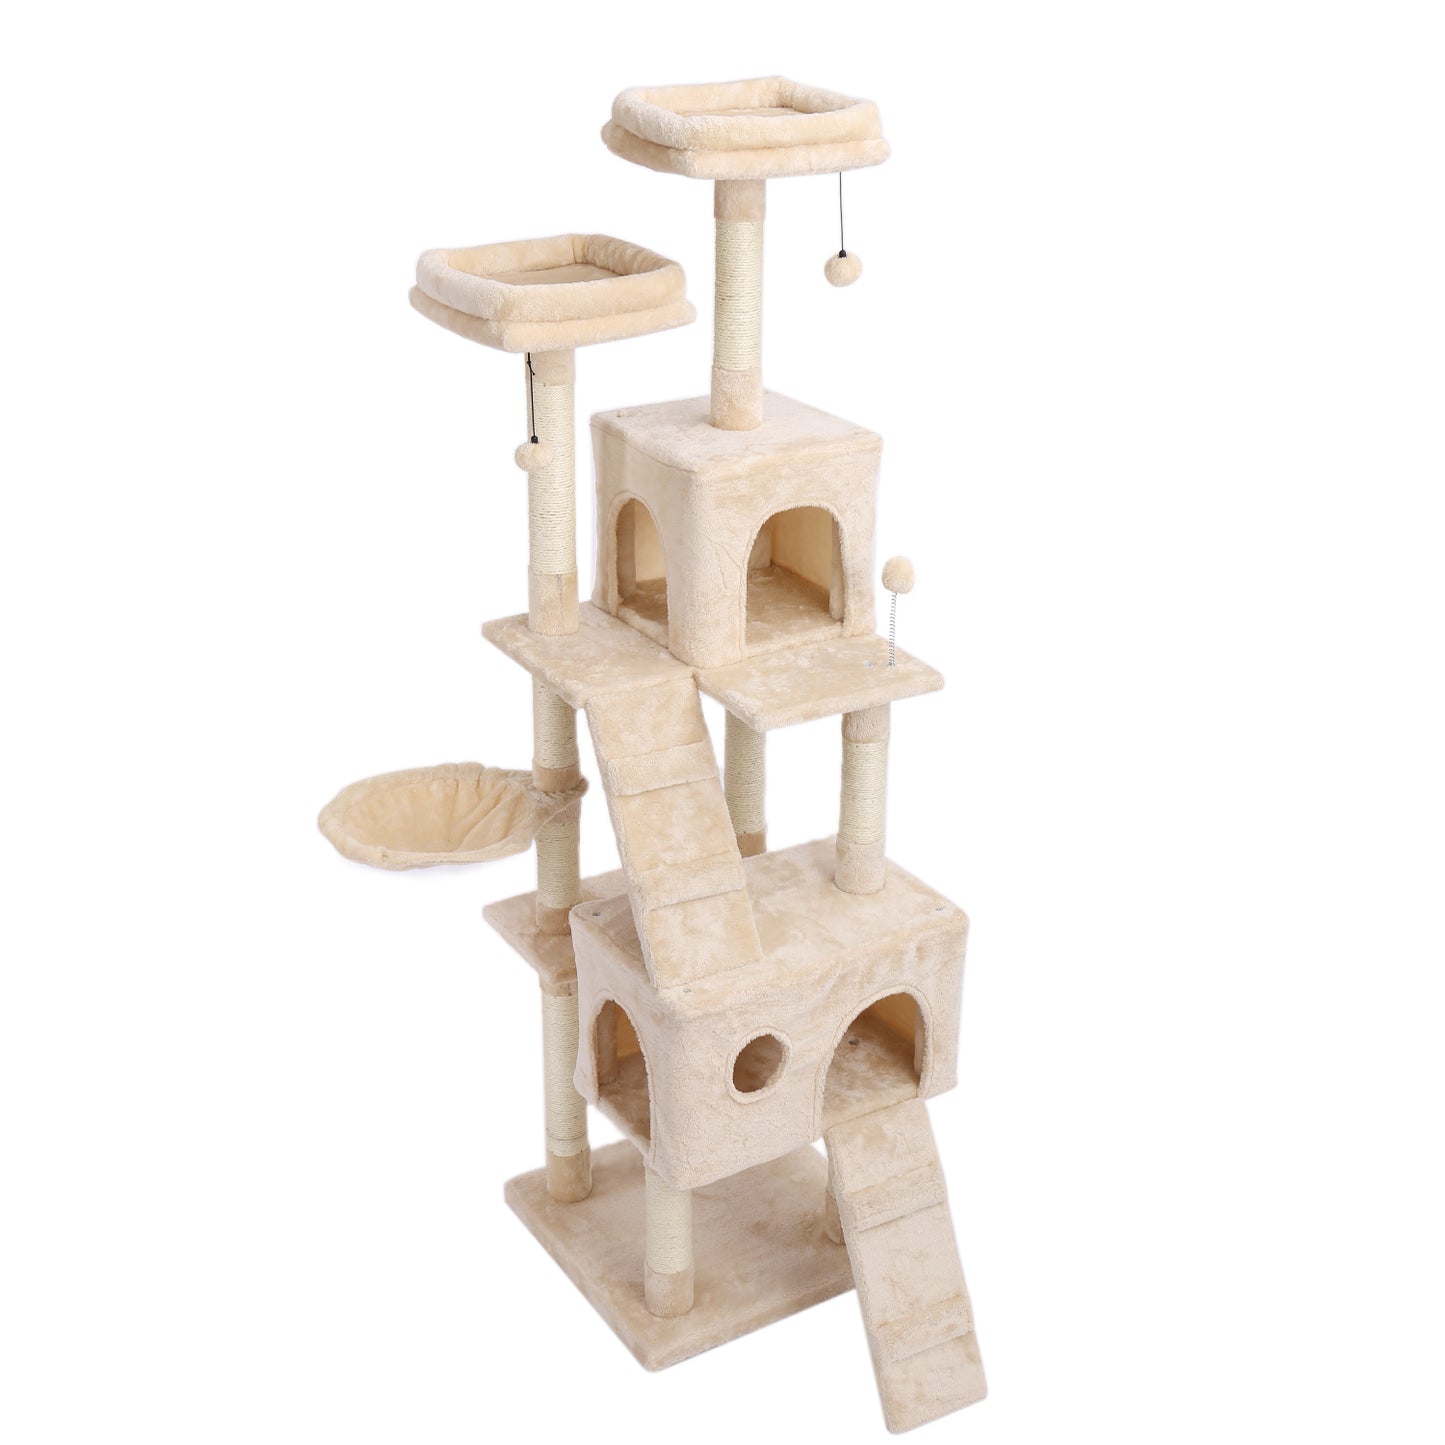 Free Shipping 180CM Multi-Level Cat Tree For Cats With Cozy Perches Stable Cat Climbing Frame Cat Scratch Board Toys Gray&Beige